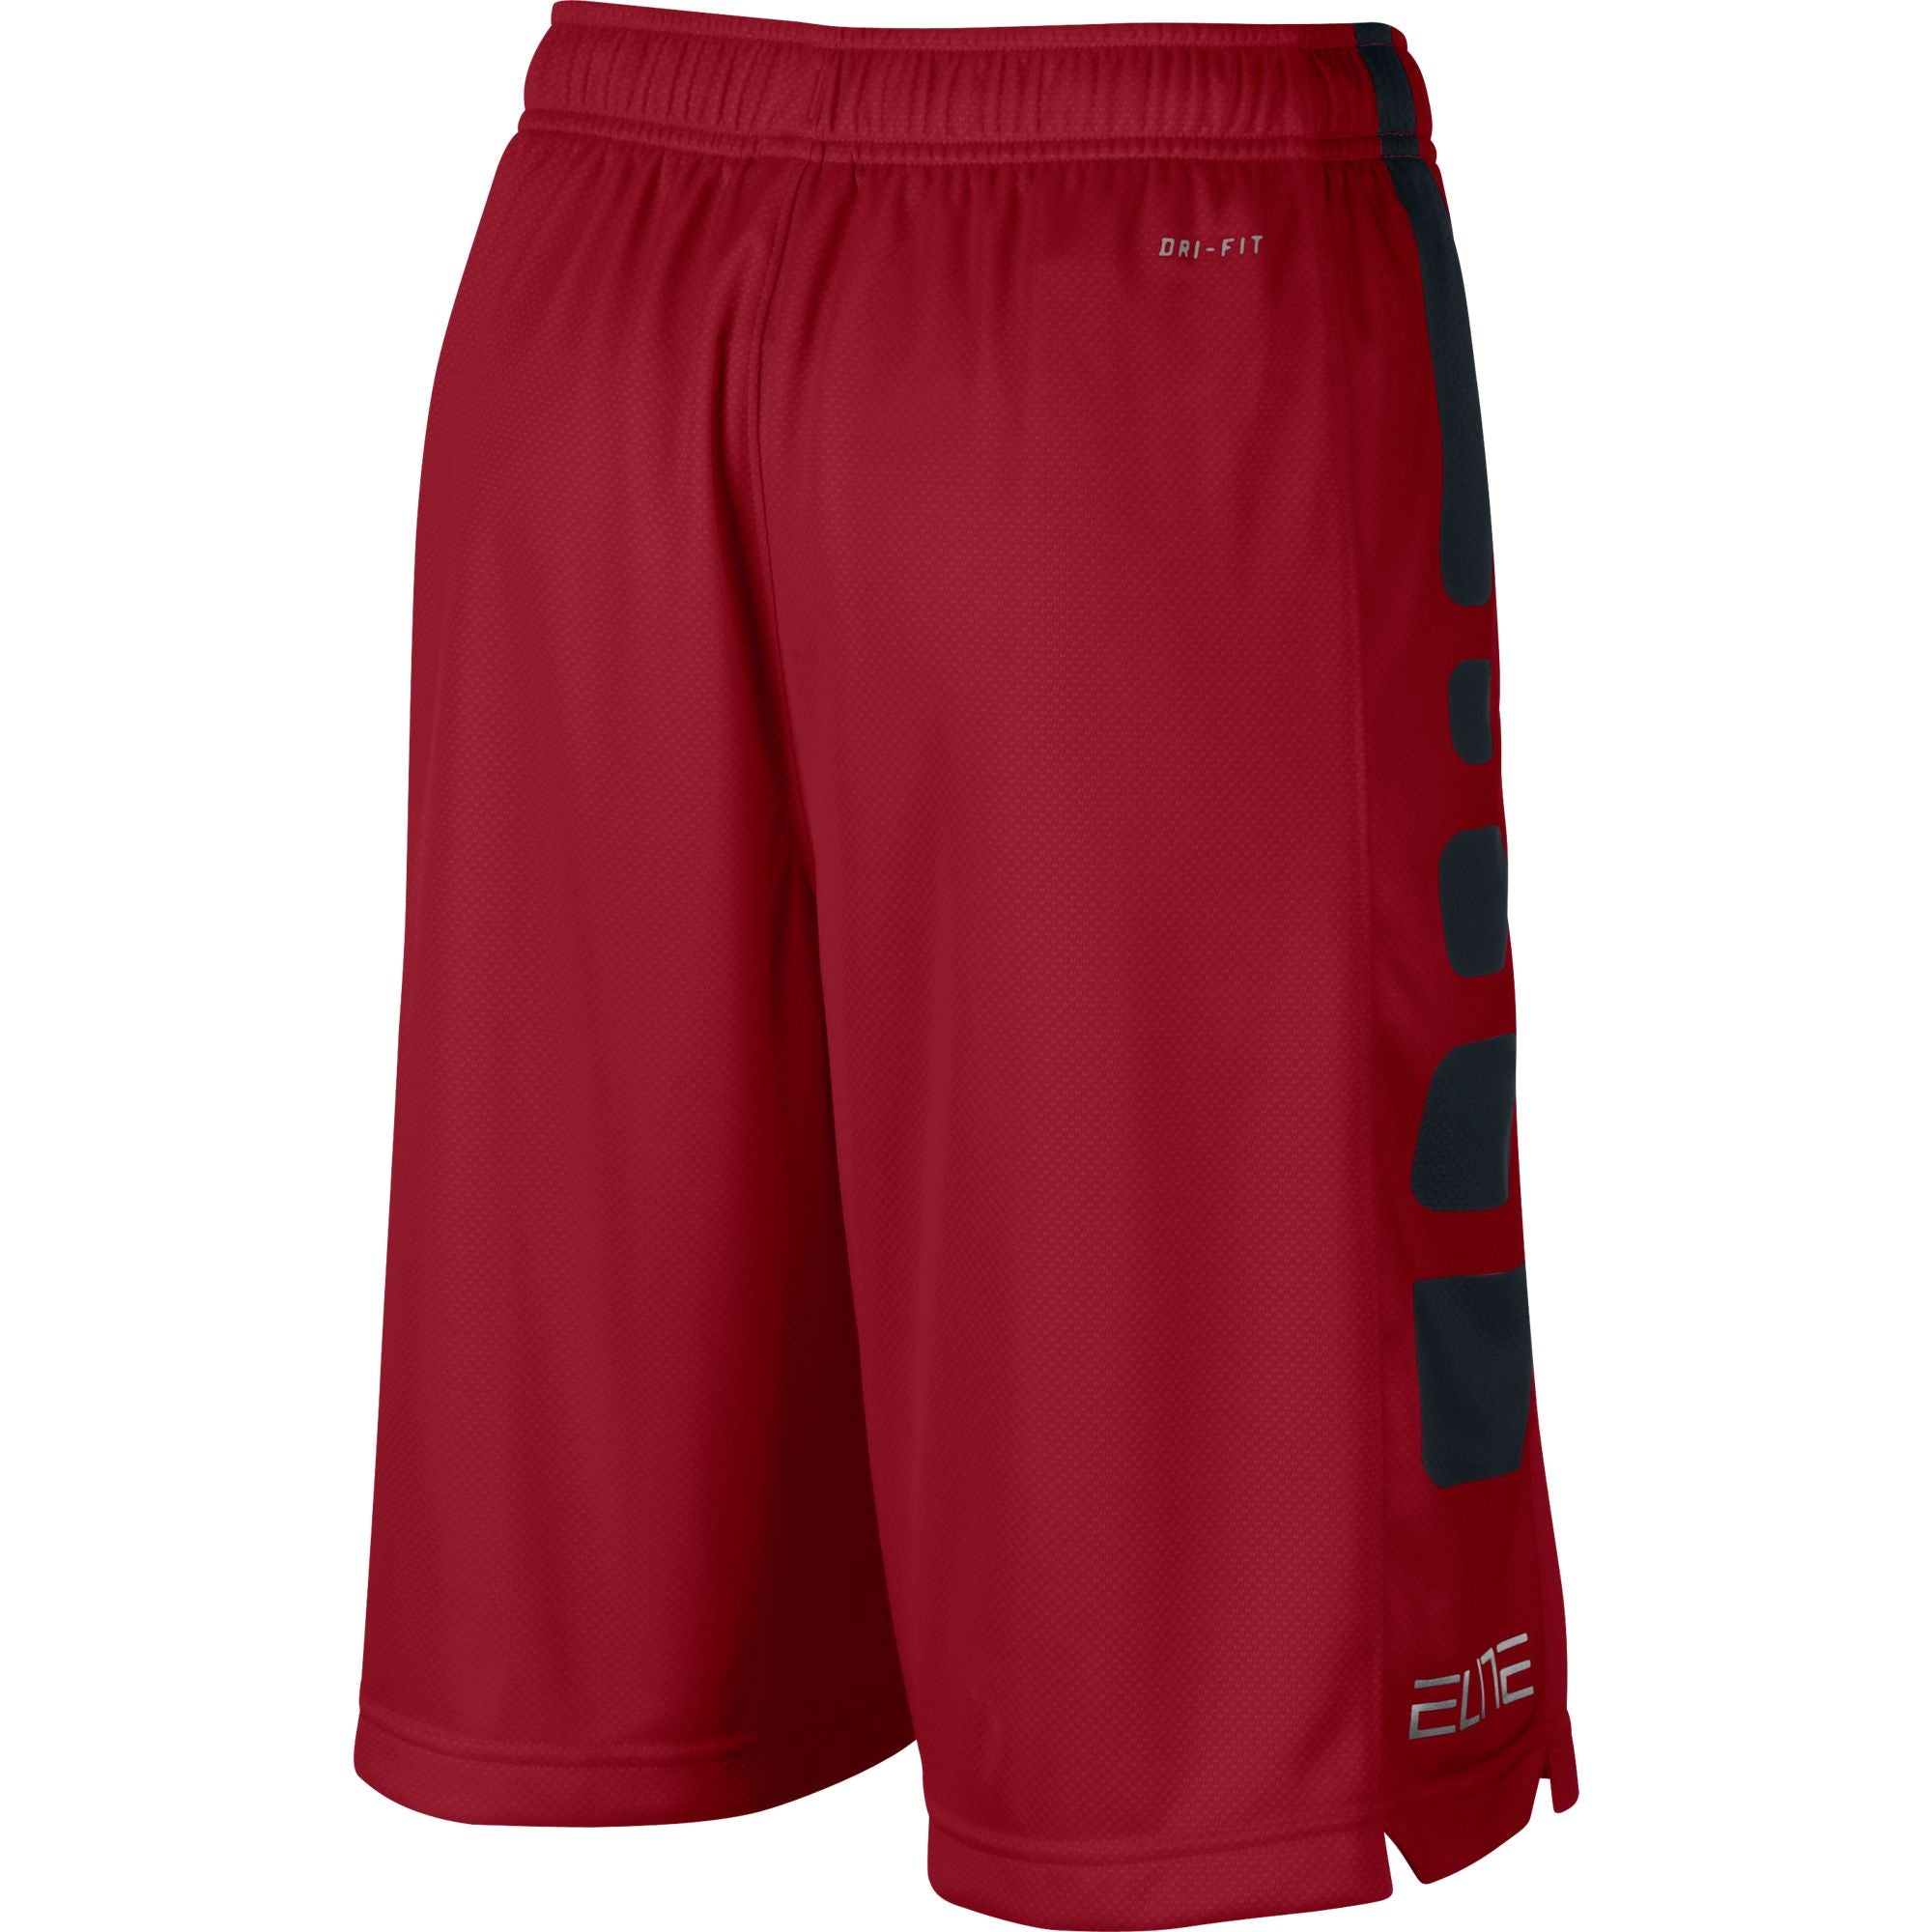 red nike shorts youth